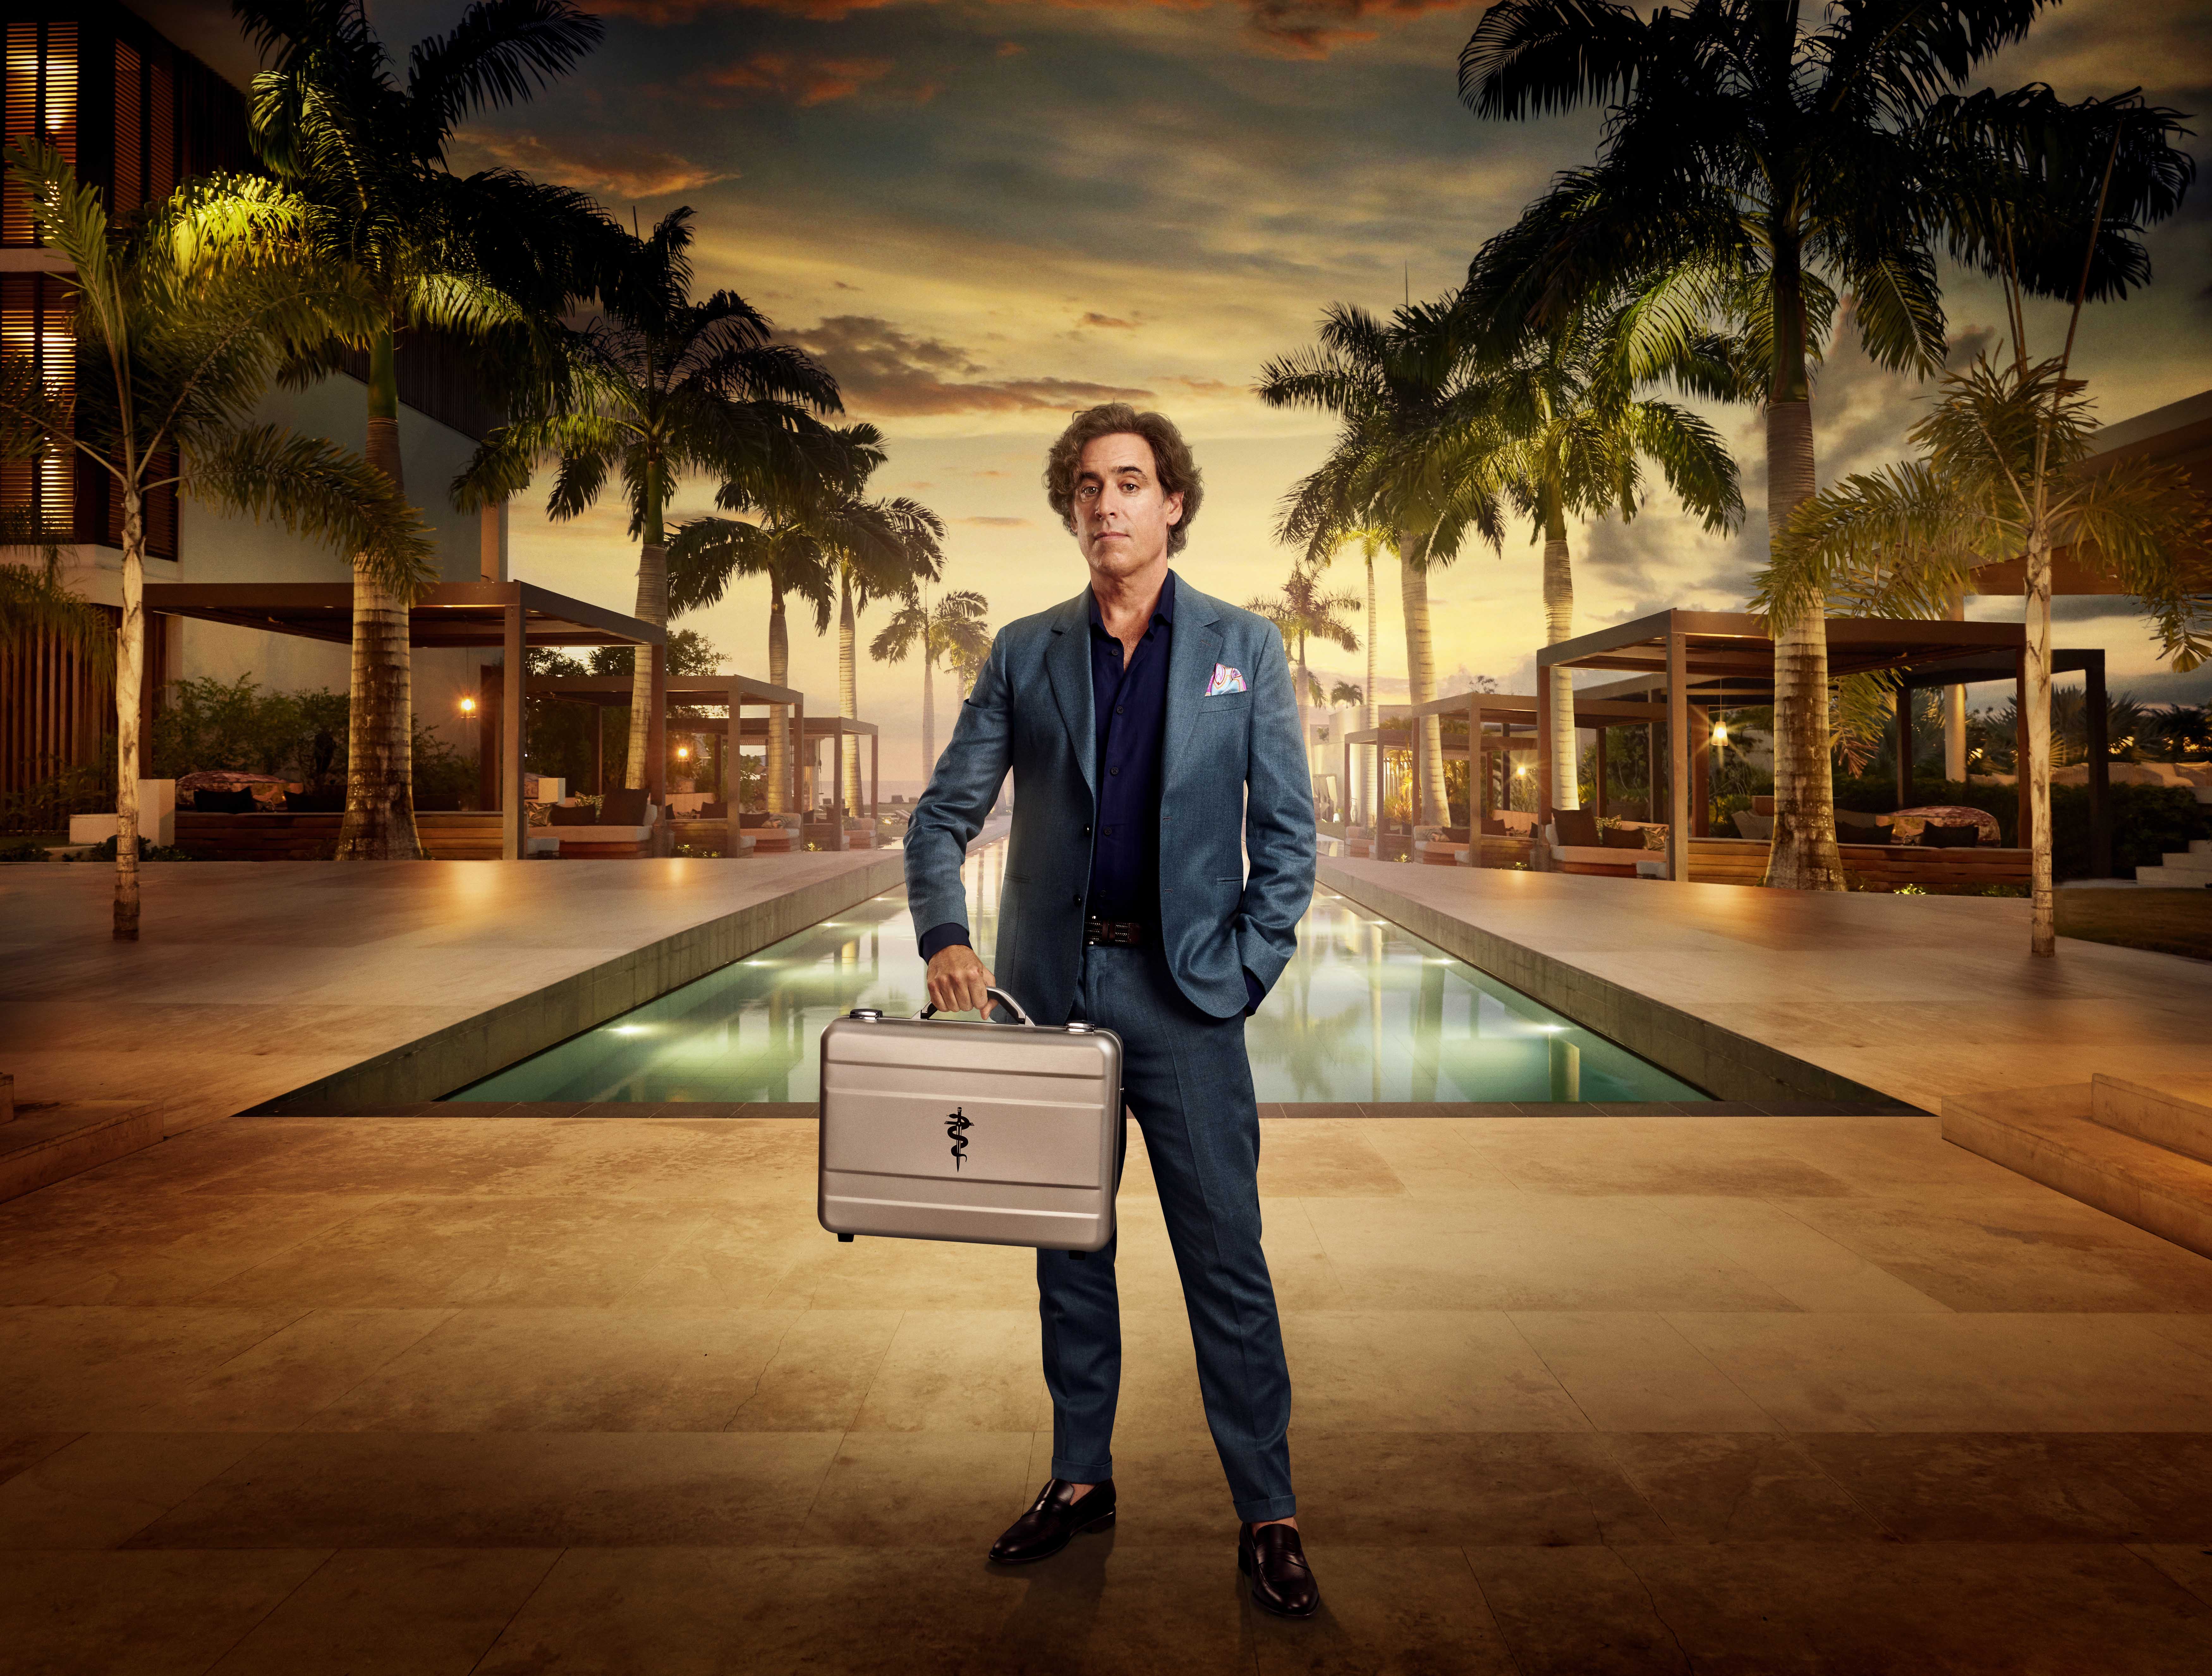 The Fortune Hotel's Stephen Mangan worried about ruining contestants' chances